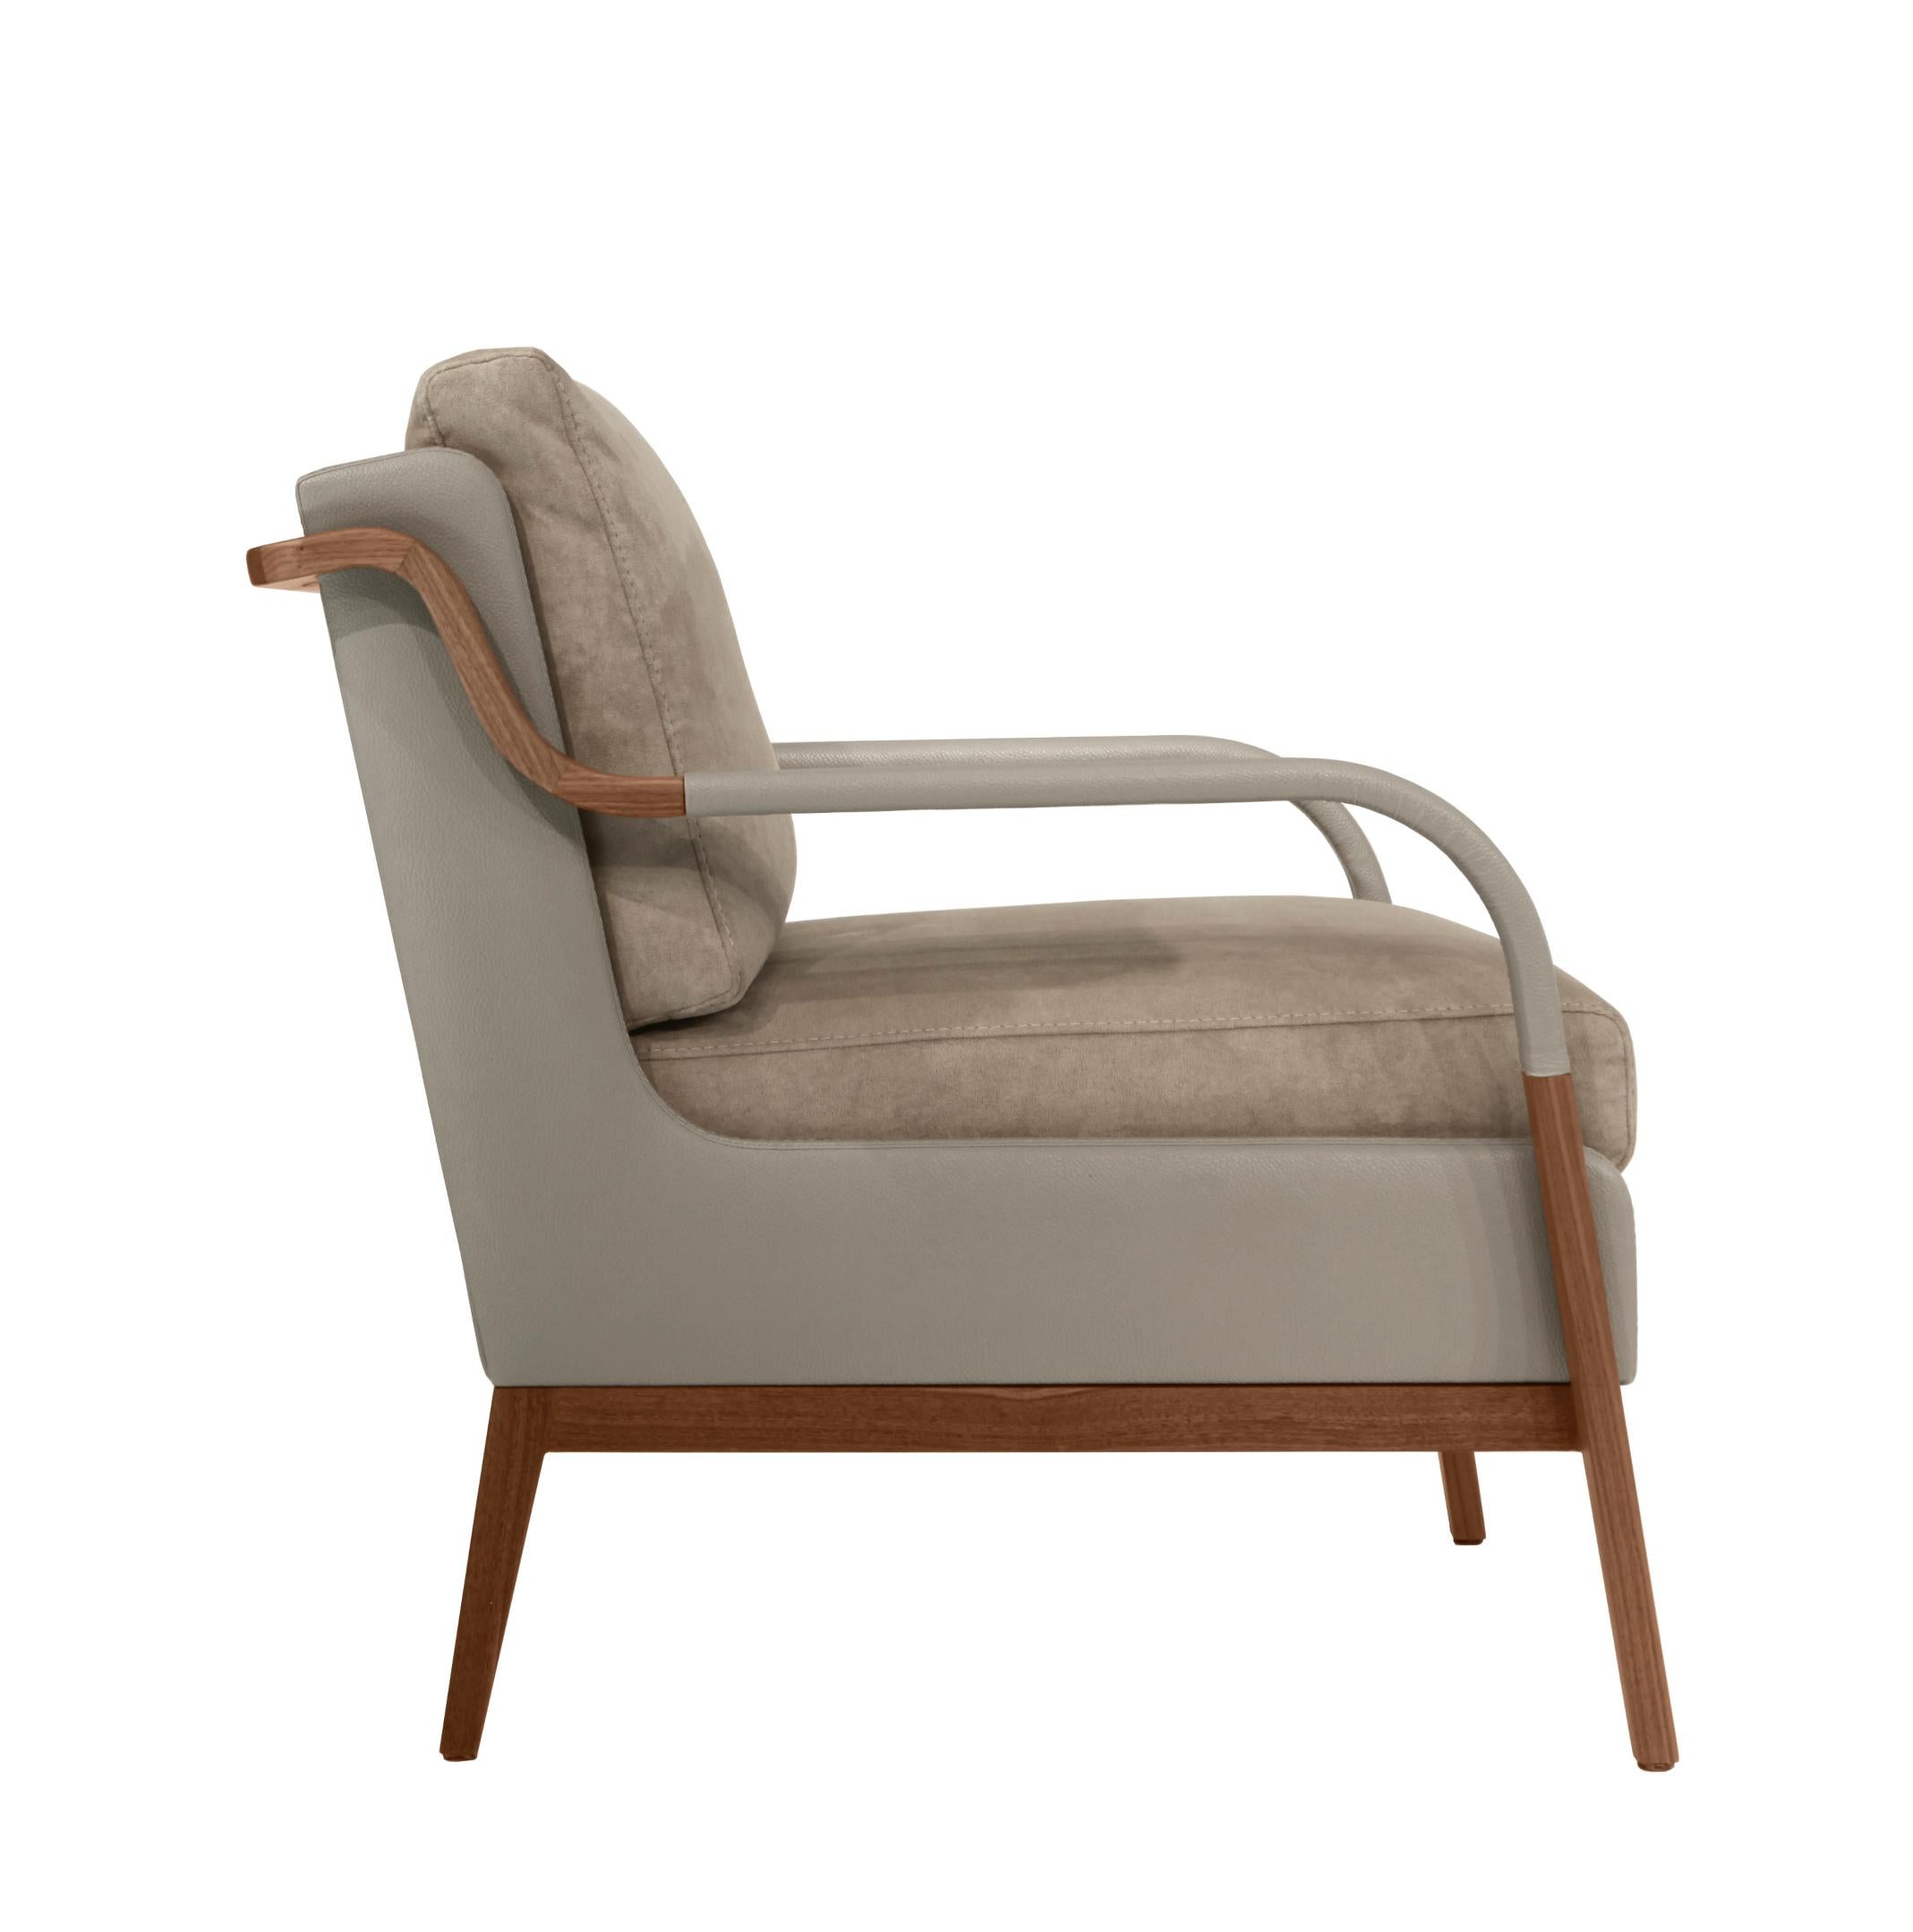 A unique node to Scandinavian design, the Norway armchair beautifully blends fabric, leather, and wood into one sleek silhouette. The elegant curve of the arm and lush seat are a comfortable, eye catching touch for any living space.